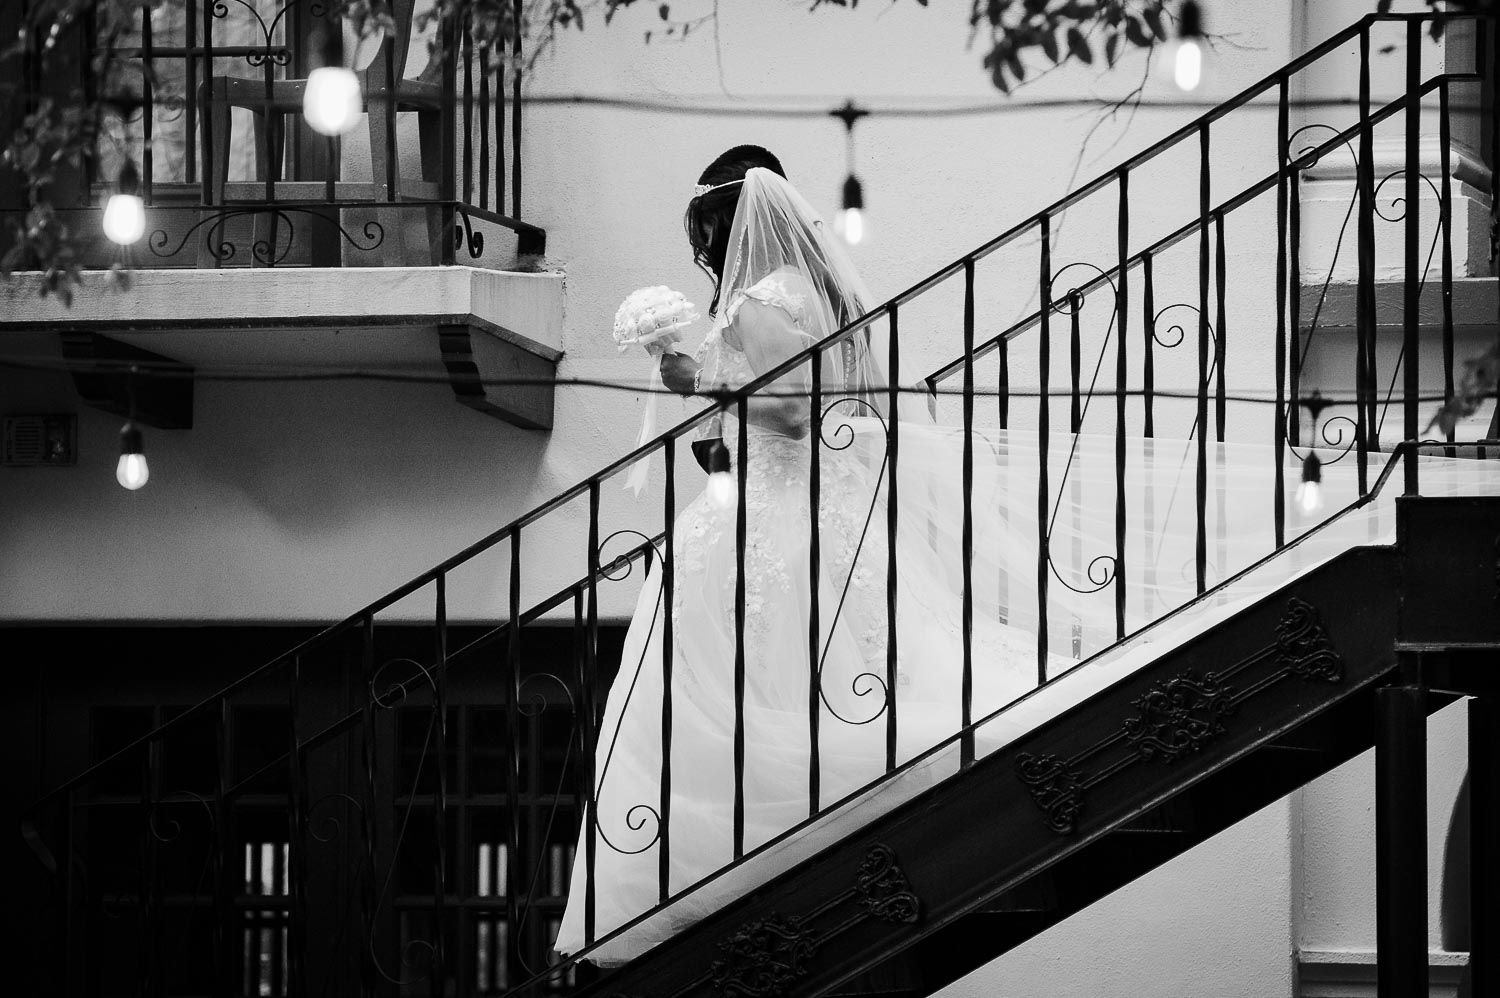 The wedding commences with the bride coming down courtyard staircase at Omni La Mansion Riverwalk hotel in San Antonio Texas